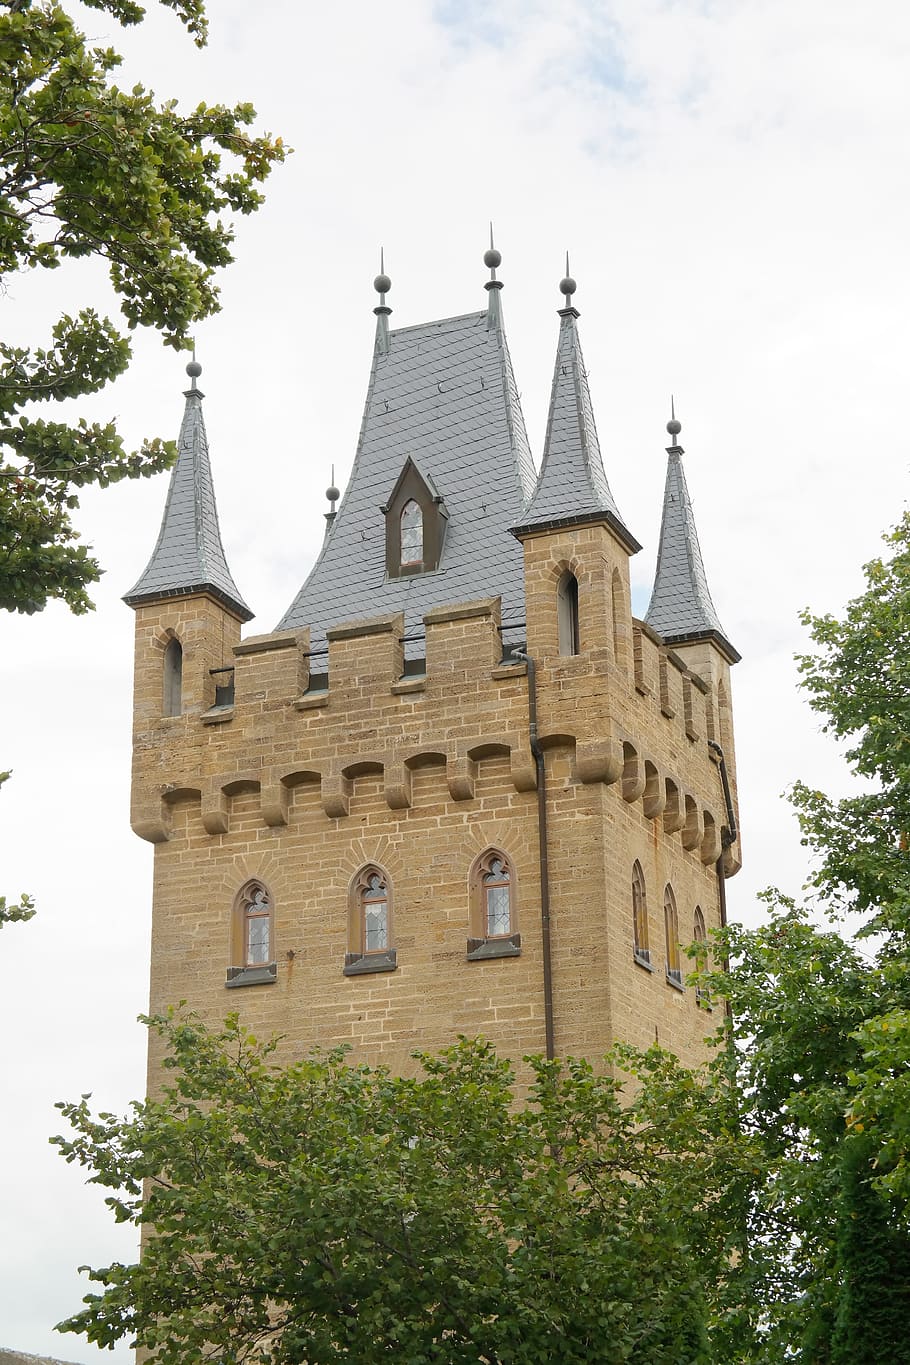 gate tower, tower, castle, fortress, hohenzollern, hohenzollern castle, ancestral castle, baden württemberg, germany, german imperial house